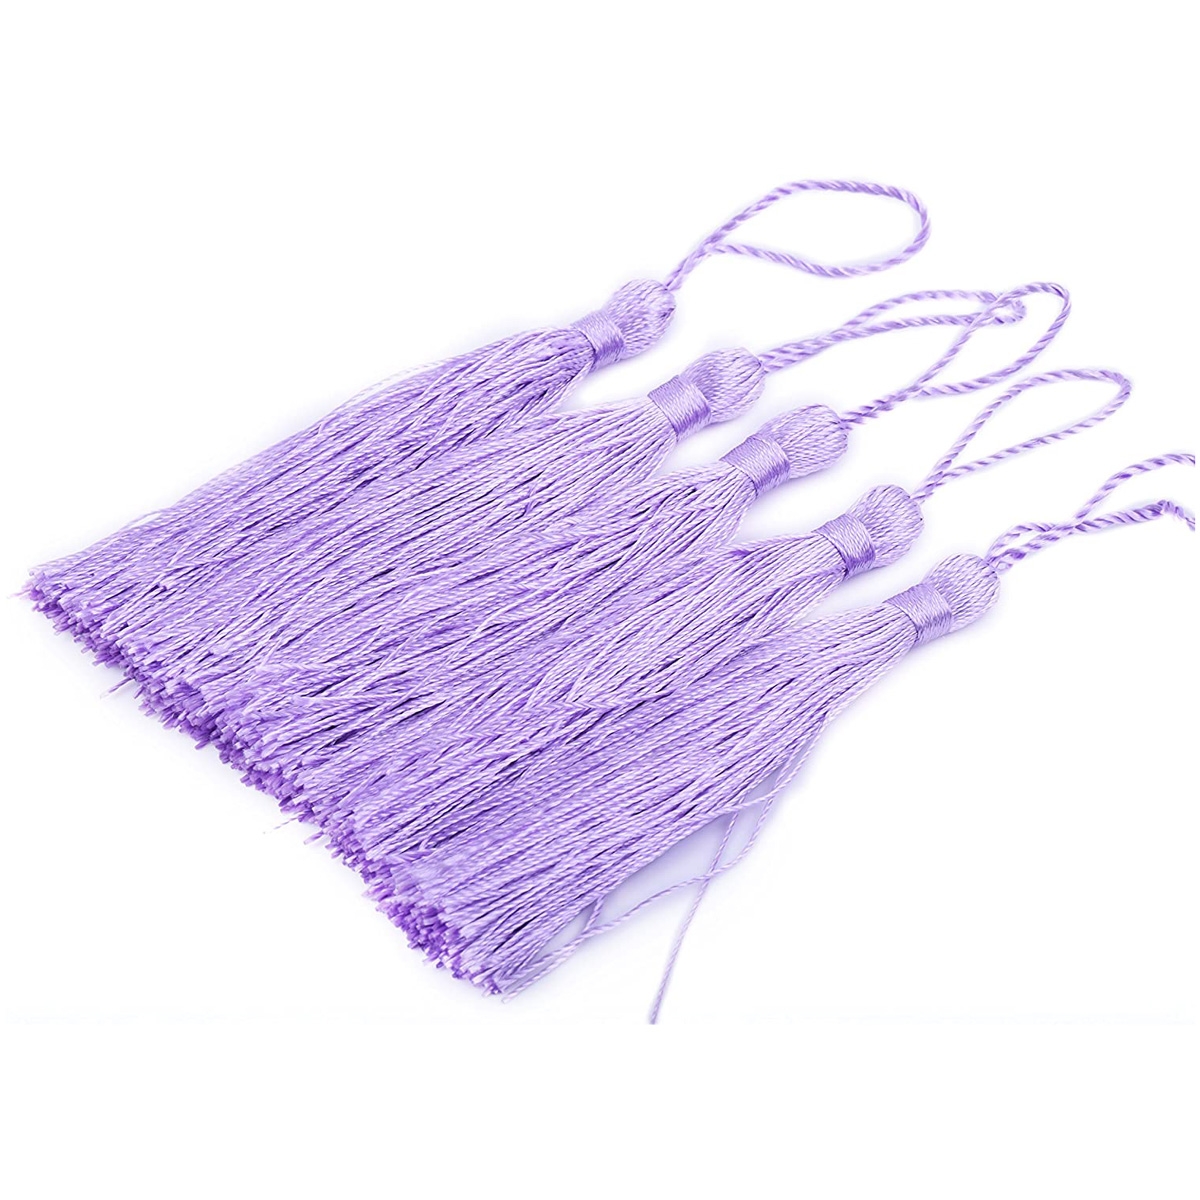 Craft Mini Tassels with Loops for Bookmarks Jewelry Making, Decoration DIY Projects (Lavender)